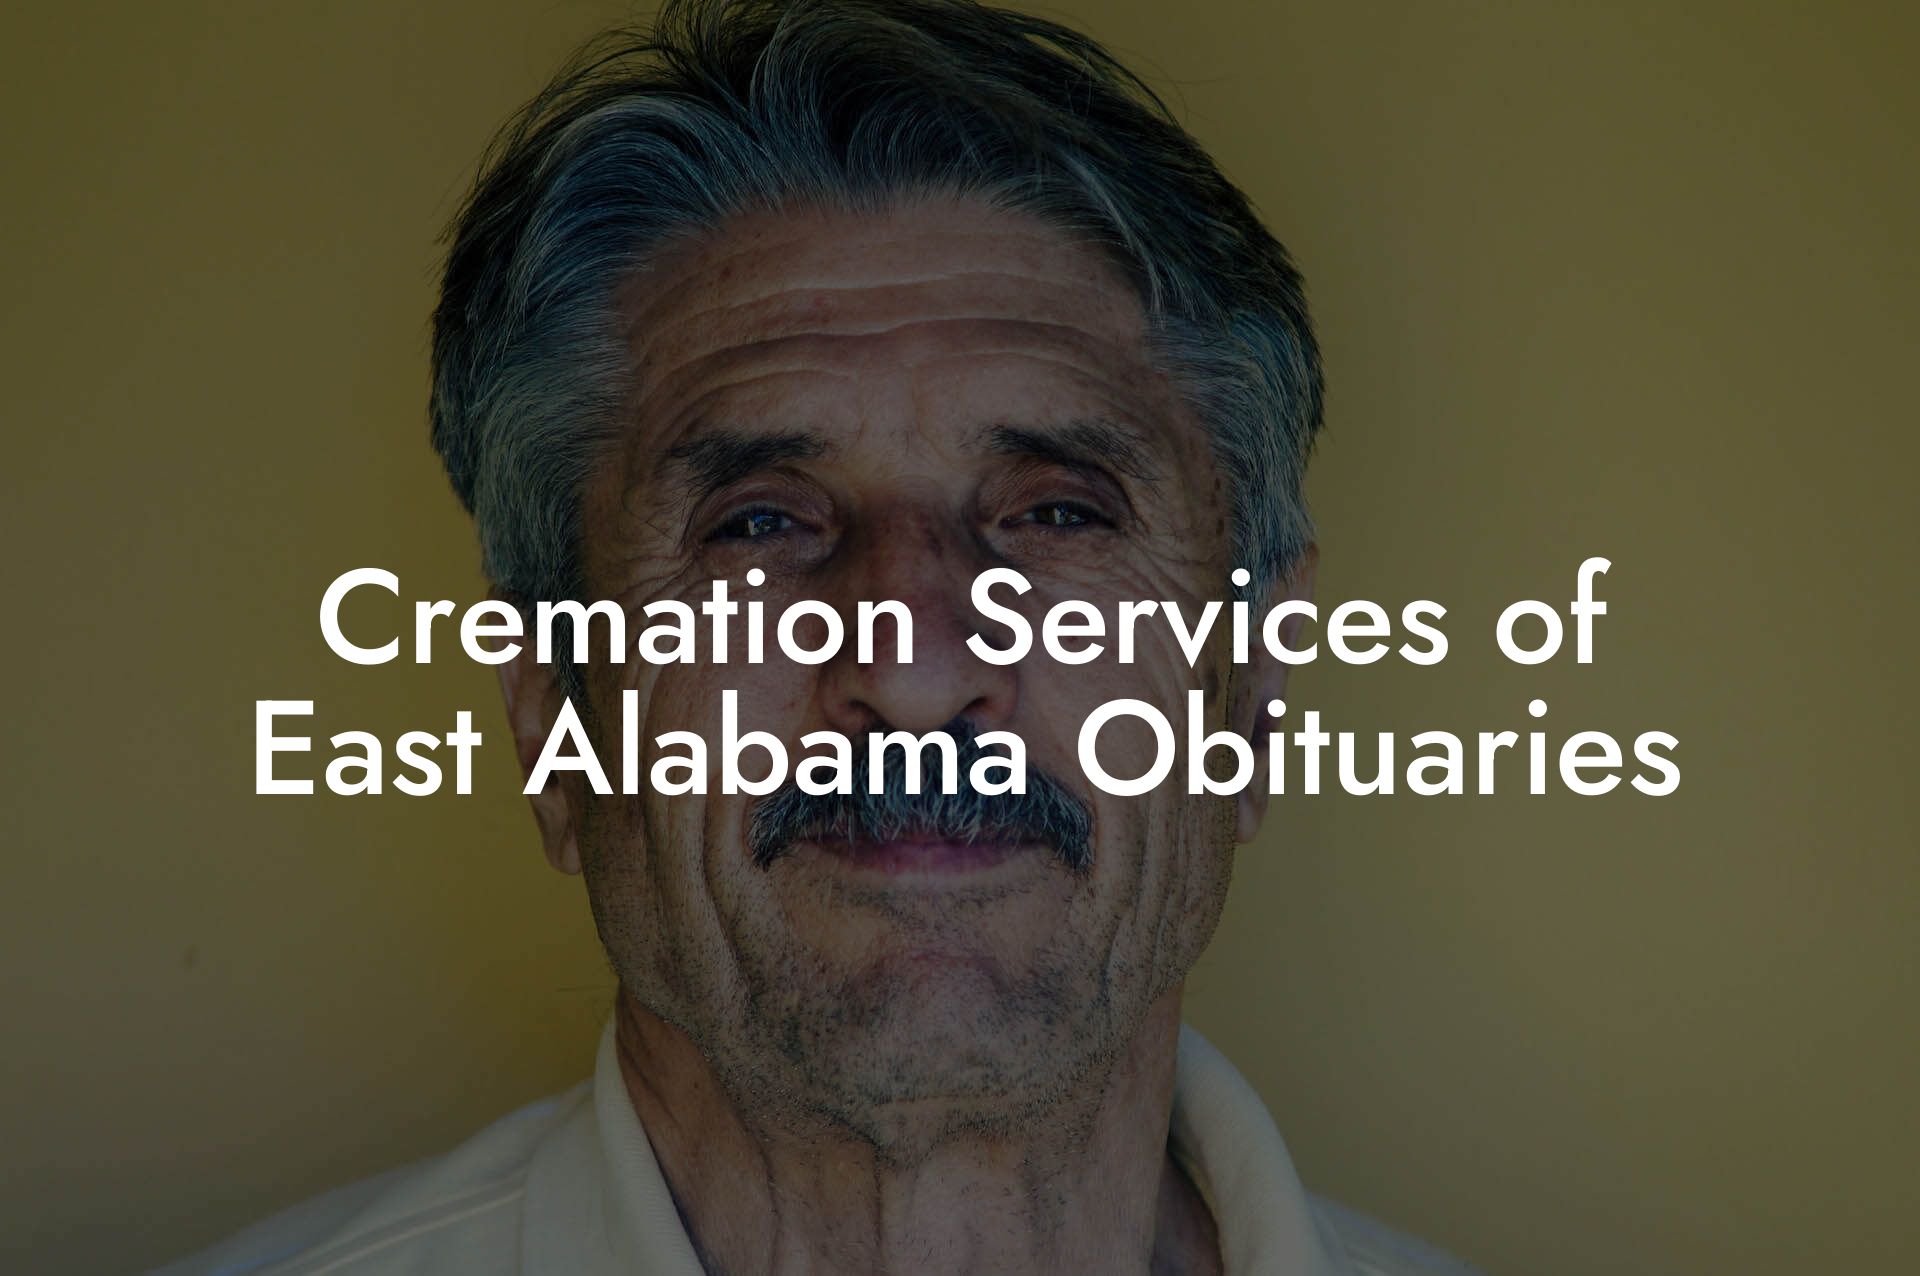 Cremation Services of East Alabama Obituaries